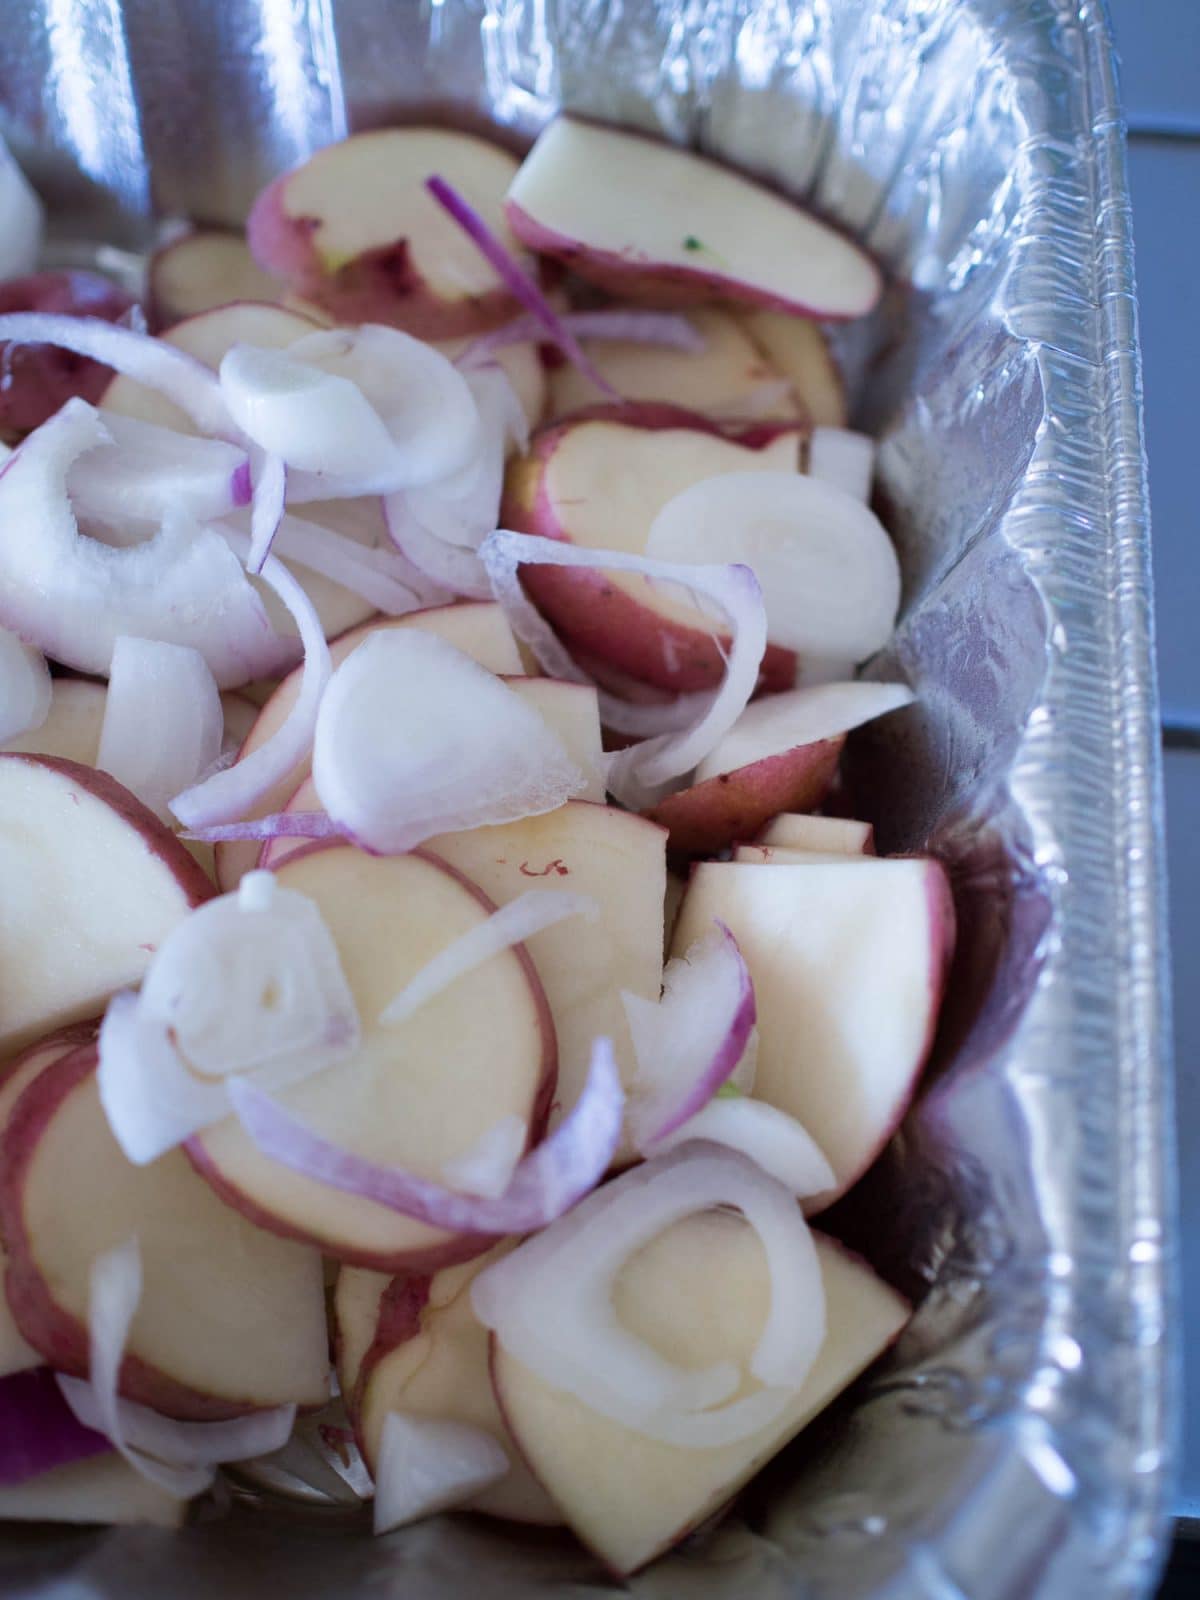 Potatoes mixed with onions on the grill